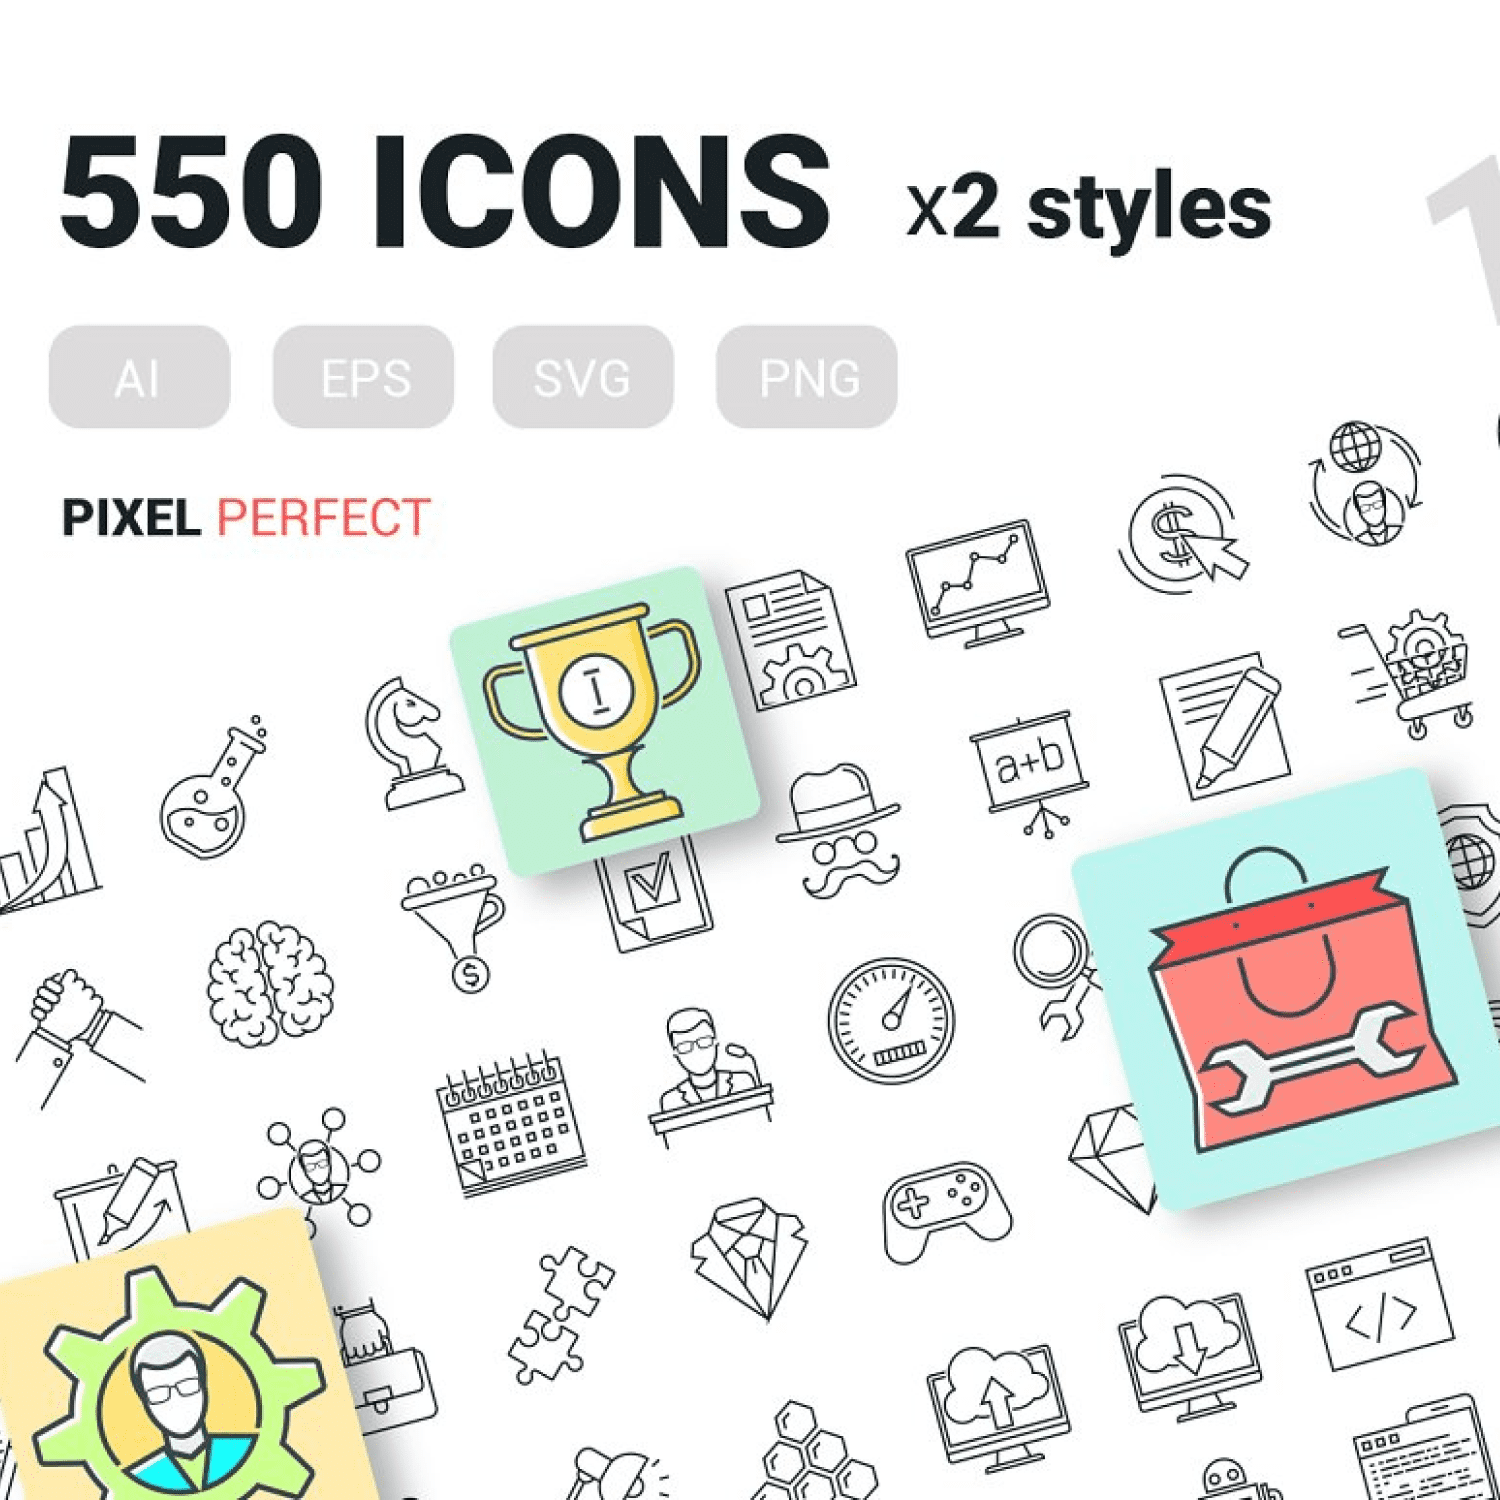 Icons pack - main image preview.